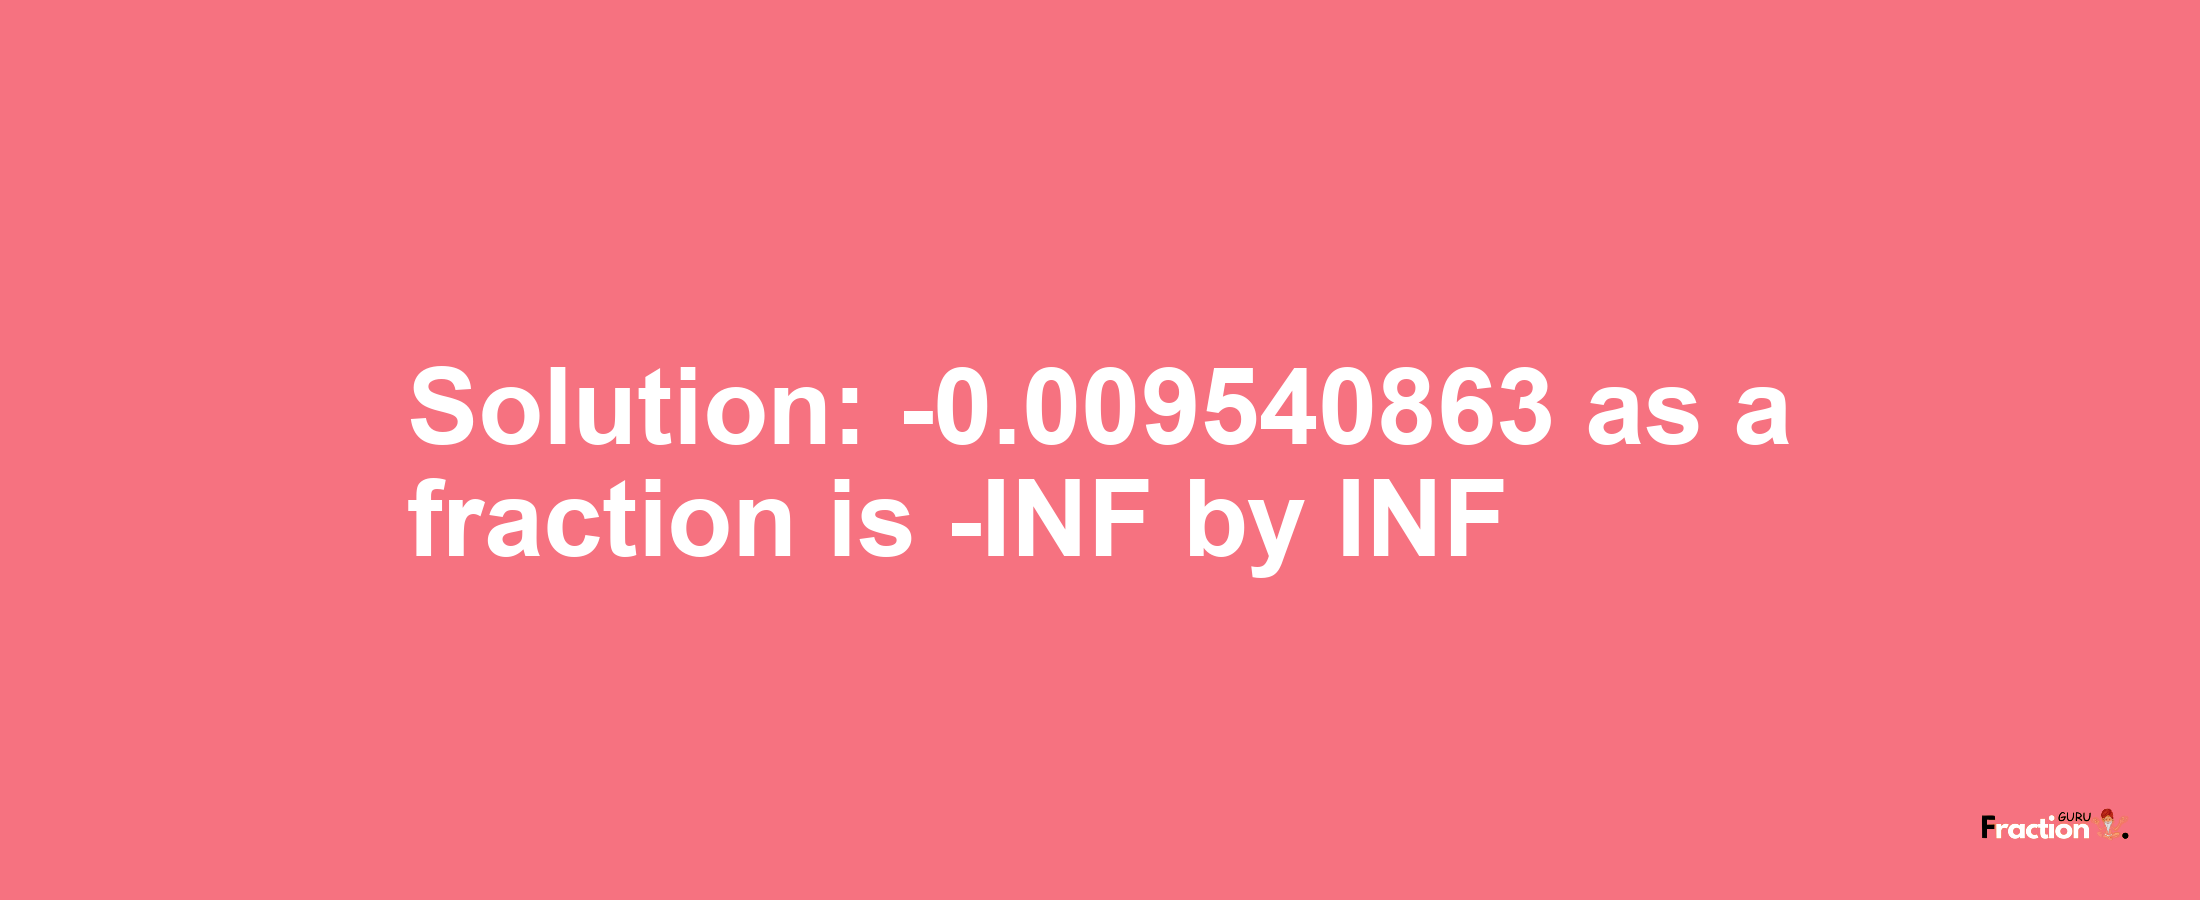 Solution:-0.009540863 as a fraction is -INF/INF